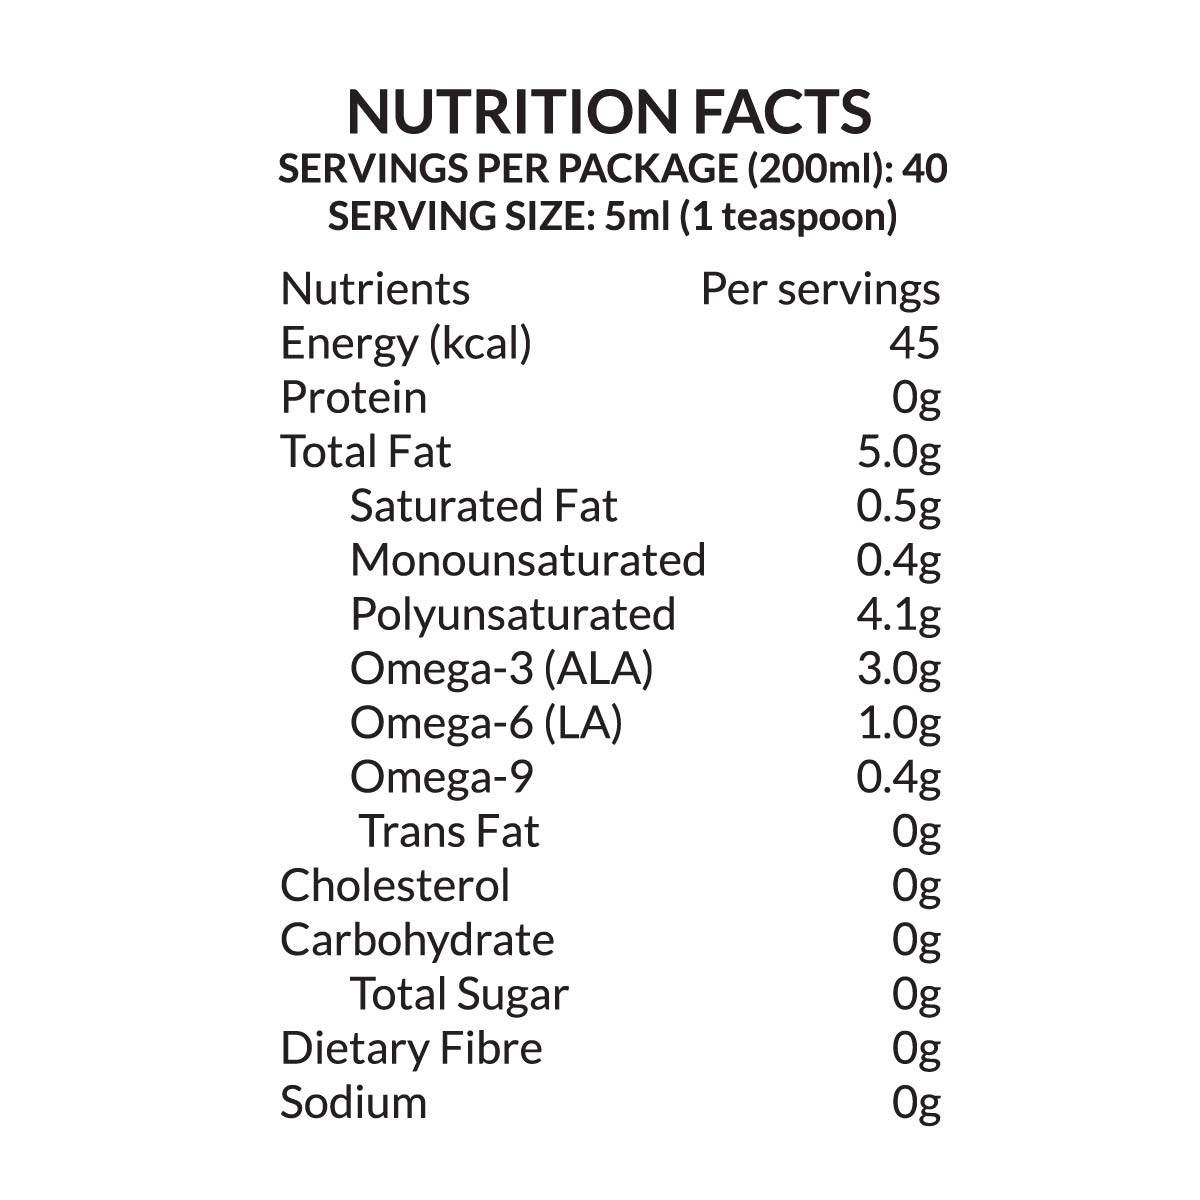 Chia Seed Oil Nutrition Facts